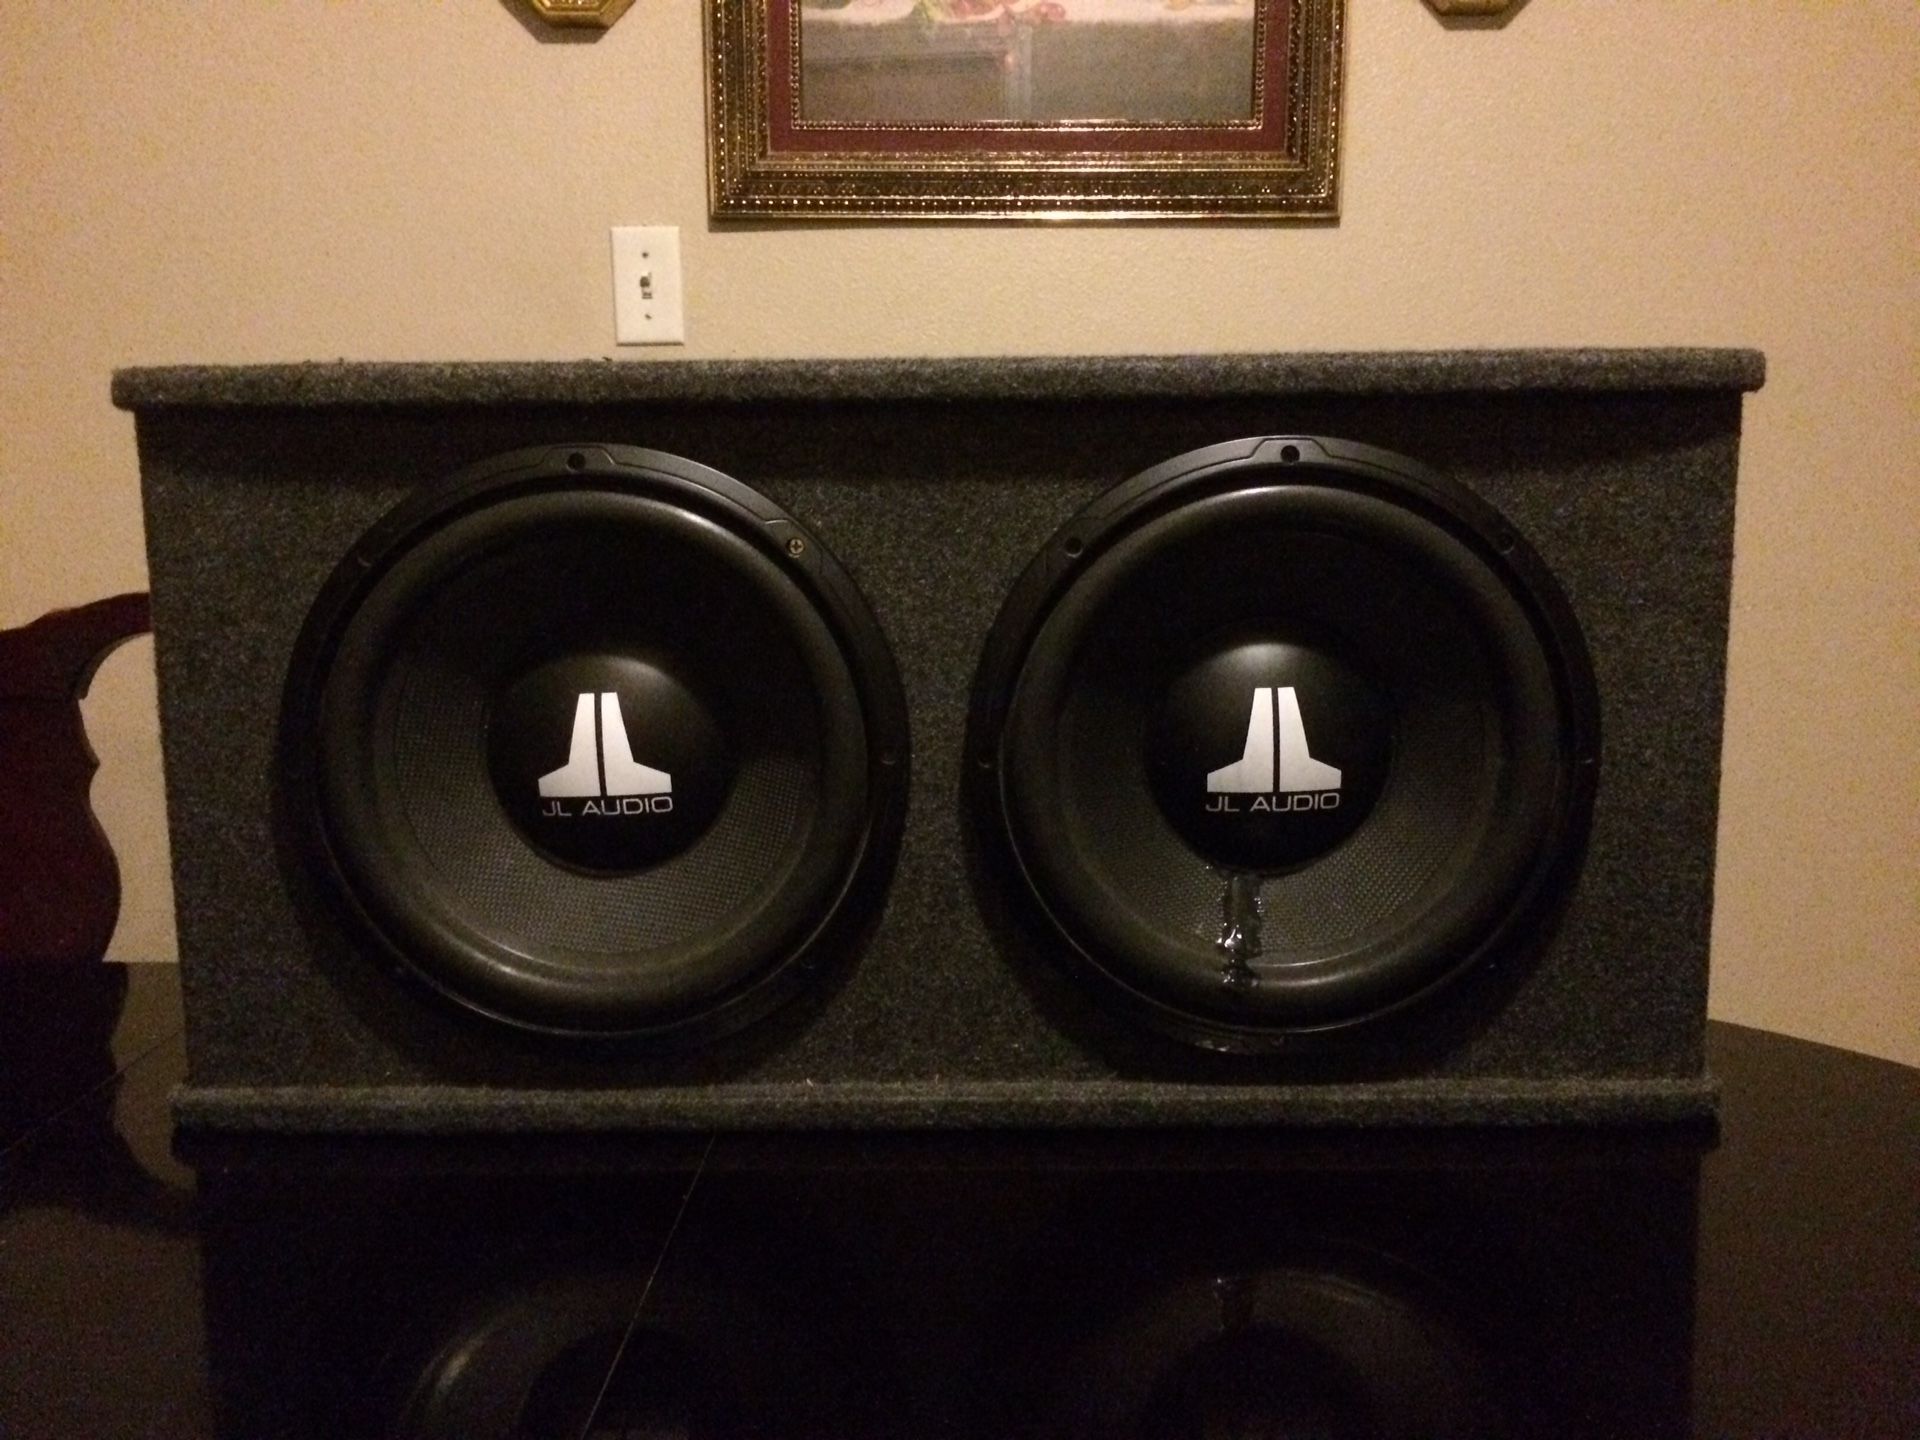 12 inch JL audio speakers with box